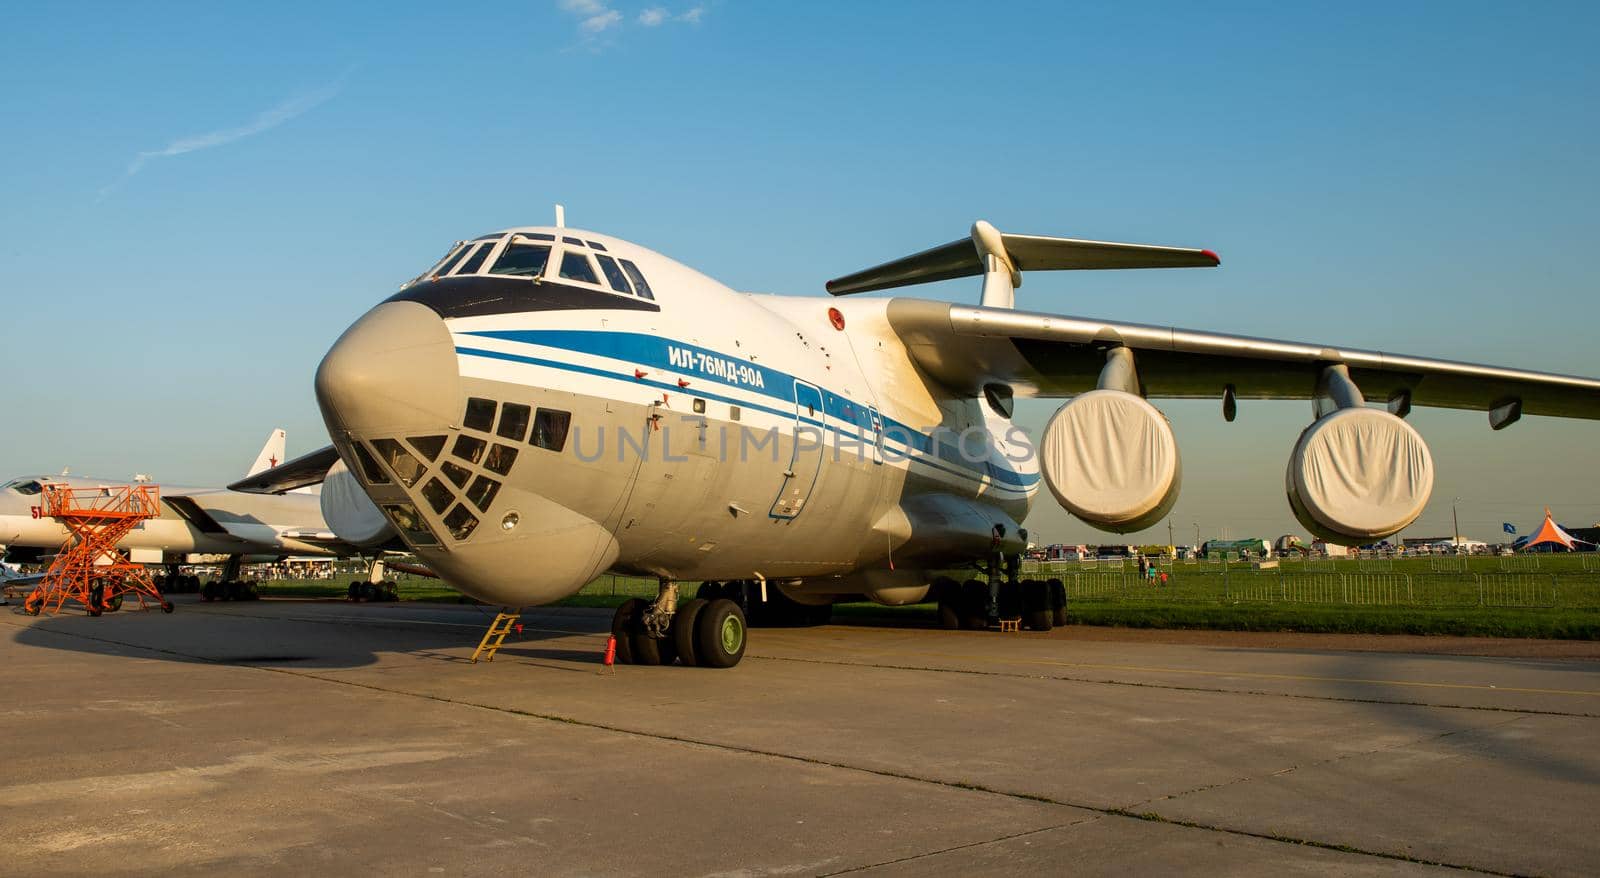 August 30, 2019, Moscow region, Russia. Russian heavy military transport aircraft Ilyushin Il-76 at the International aviation and space salon.